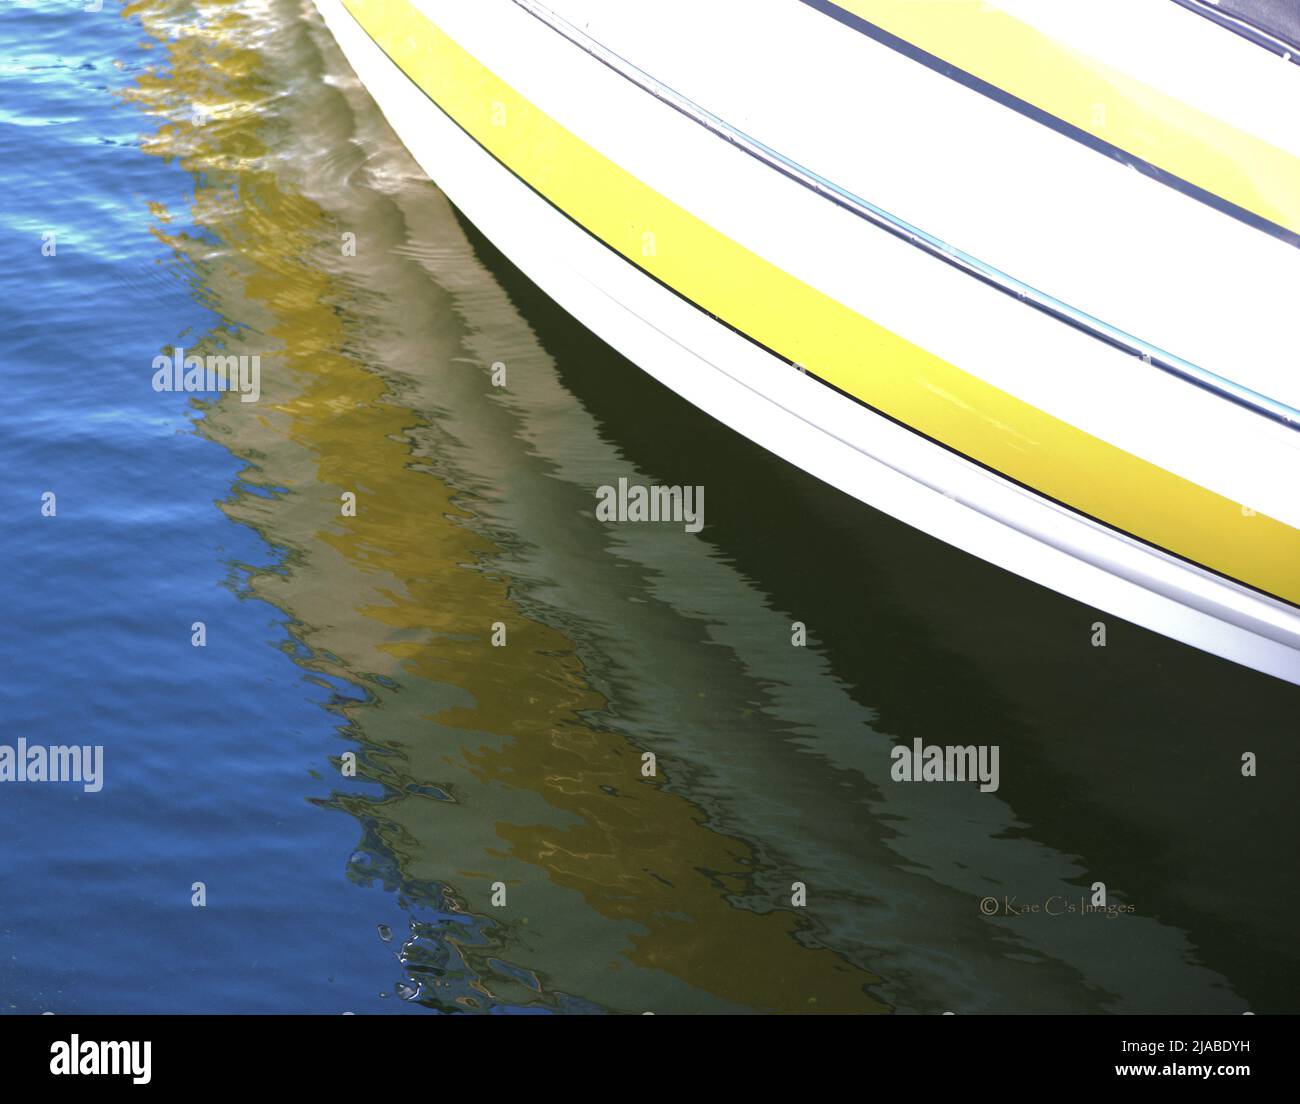 Abstract boat with white ahd hellow bands, reflected on the water. Stock Photo